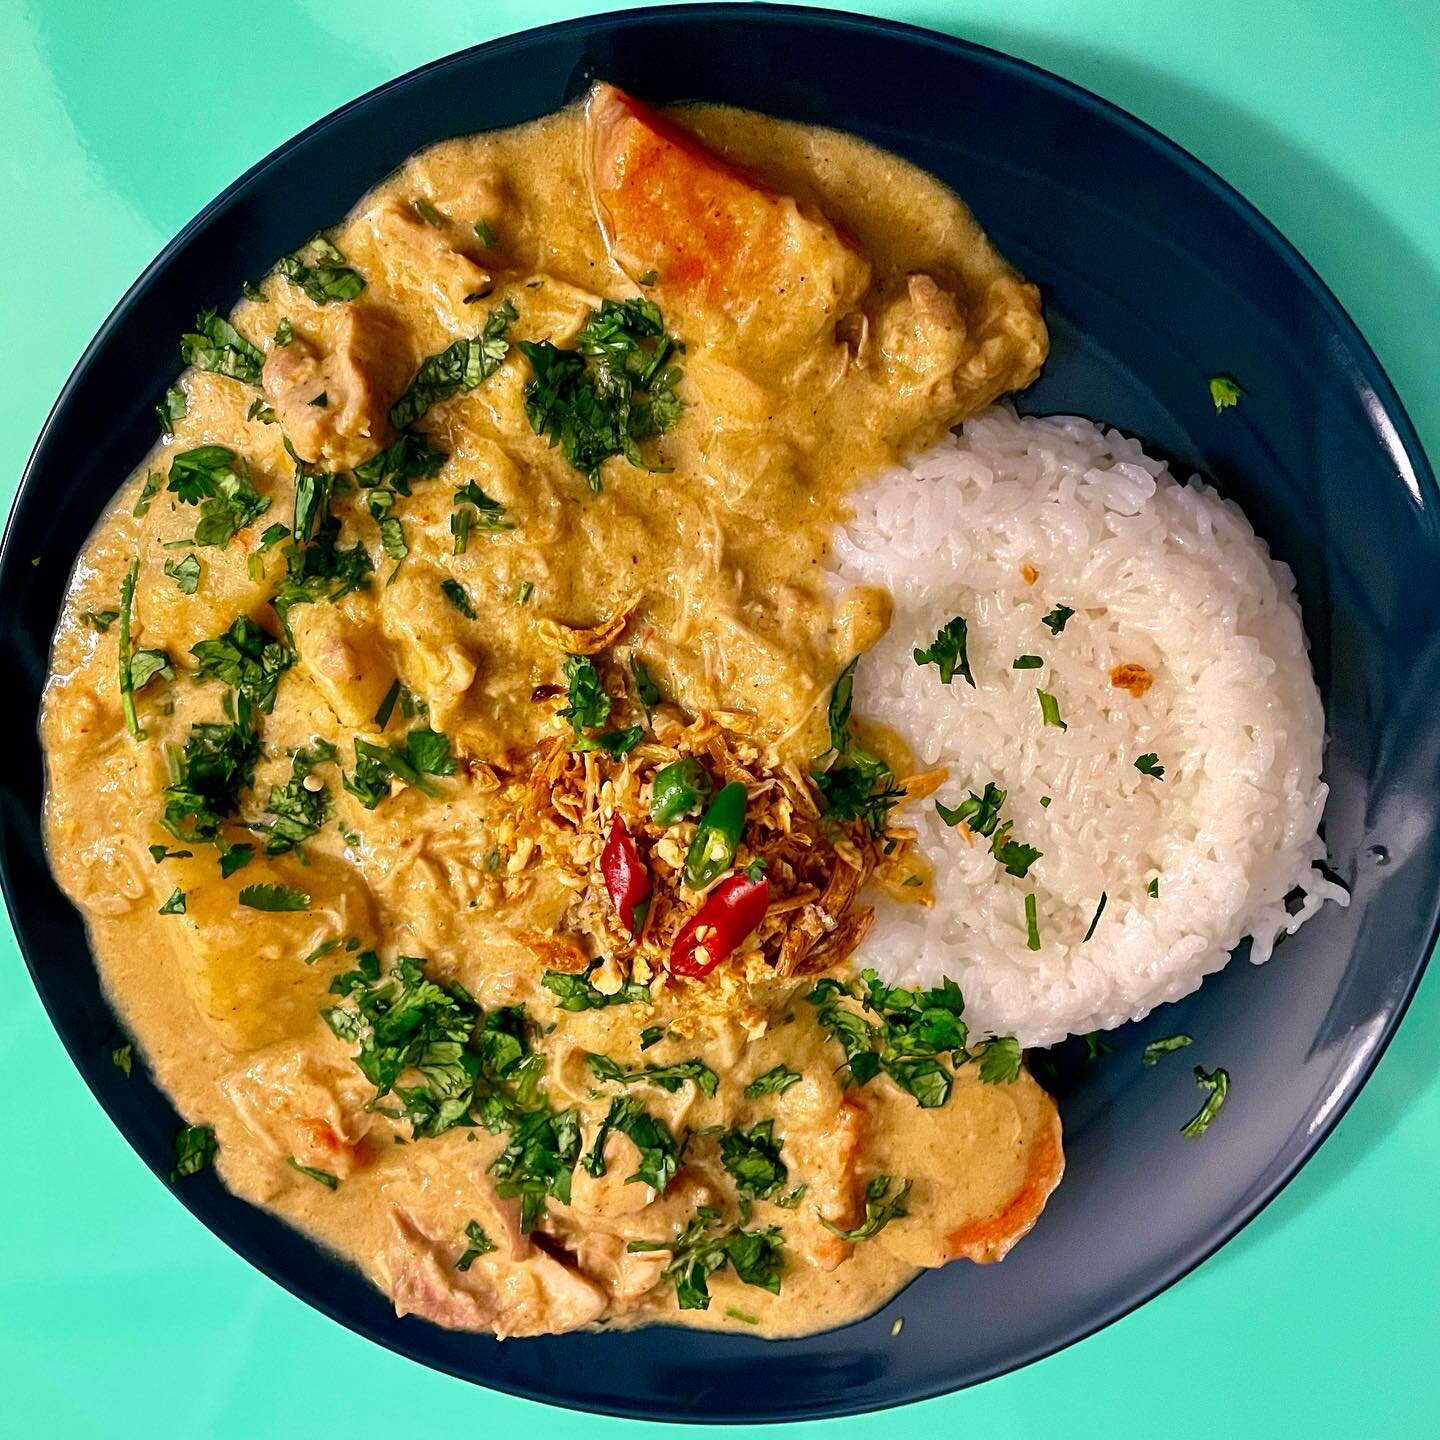 This week the people eat Thai chicken curry. It&rsquo;s fucking delicious!  Now how about you decide to house my unhoused friends @londonbreed ?  I&rsquo;m feeding 1000 people every month. What the fuck are you doing to improve their conditions?